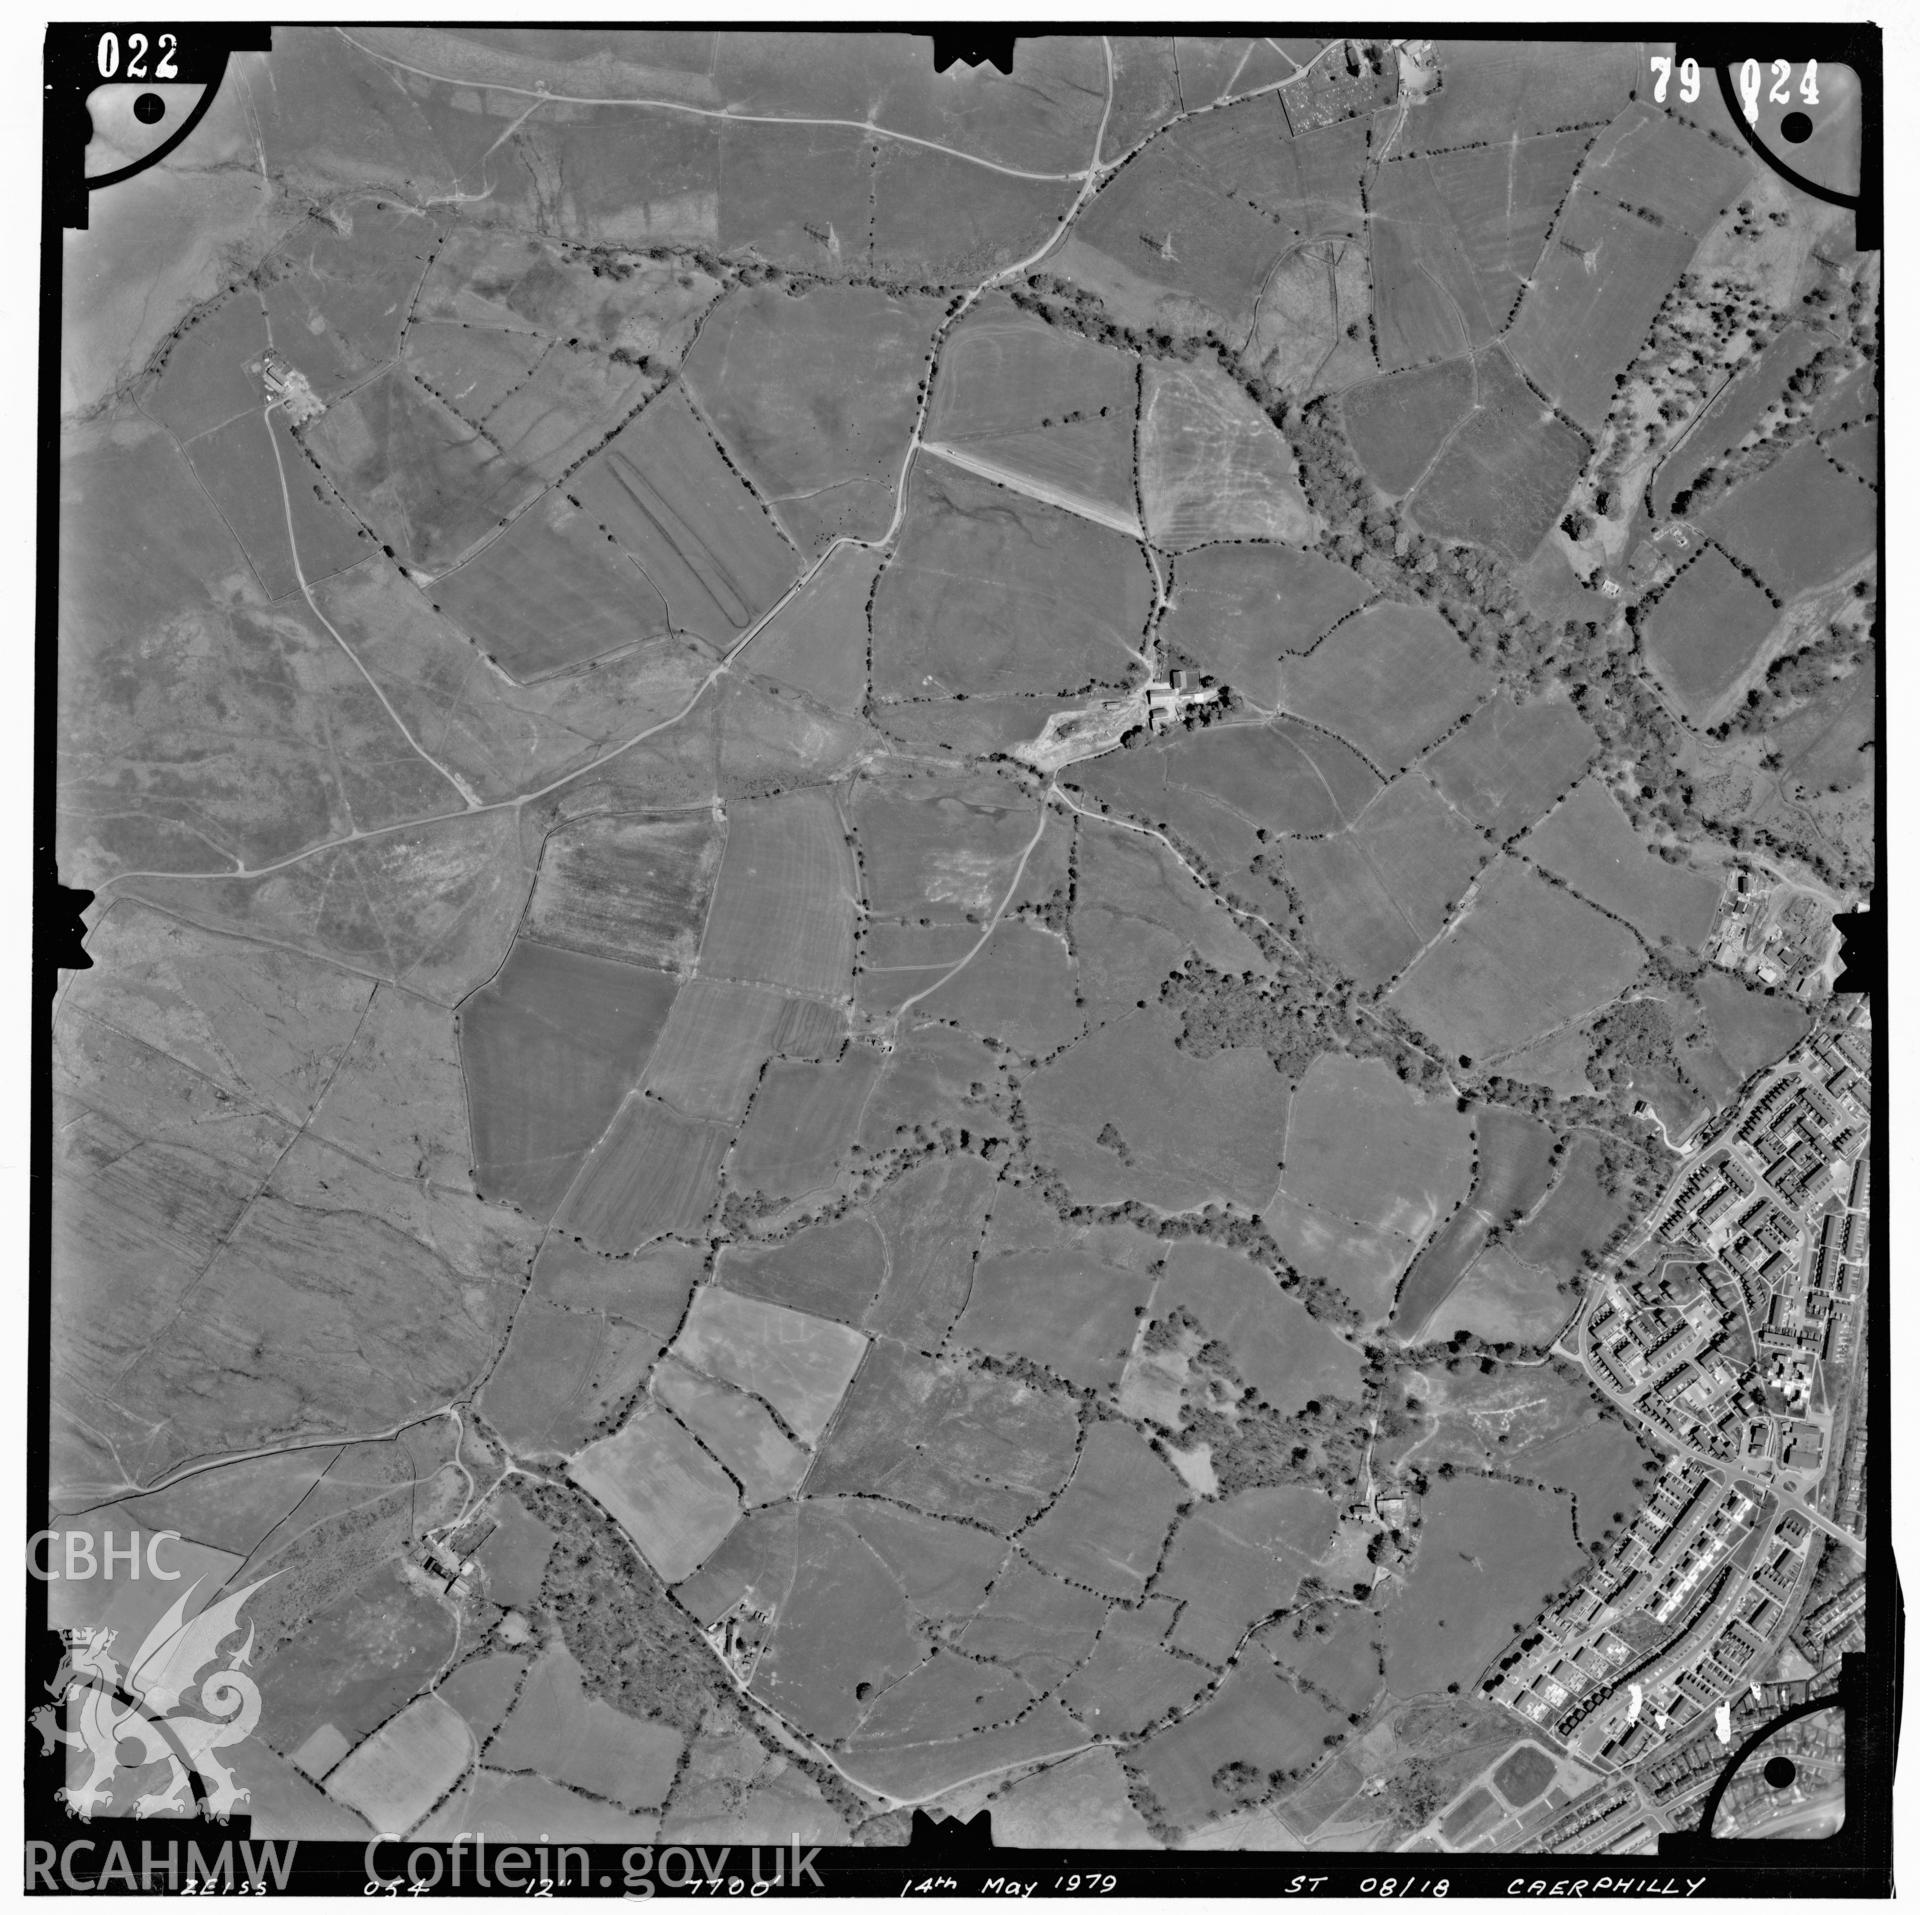 Digitized copy of an aerial photograph showing Pontypridd area (centred on NGR 309984 189766) taken by Ordnance Survey, 1979.